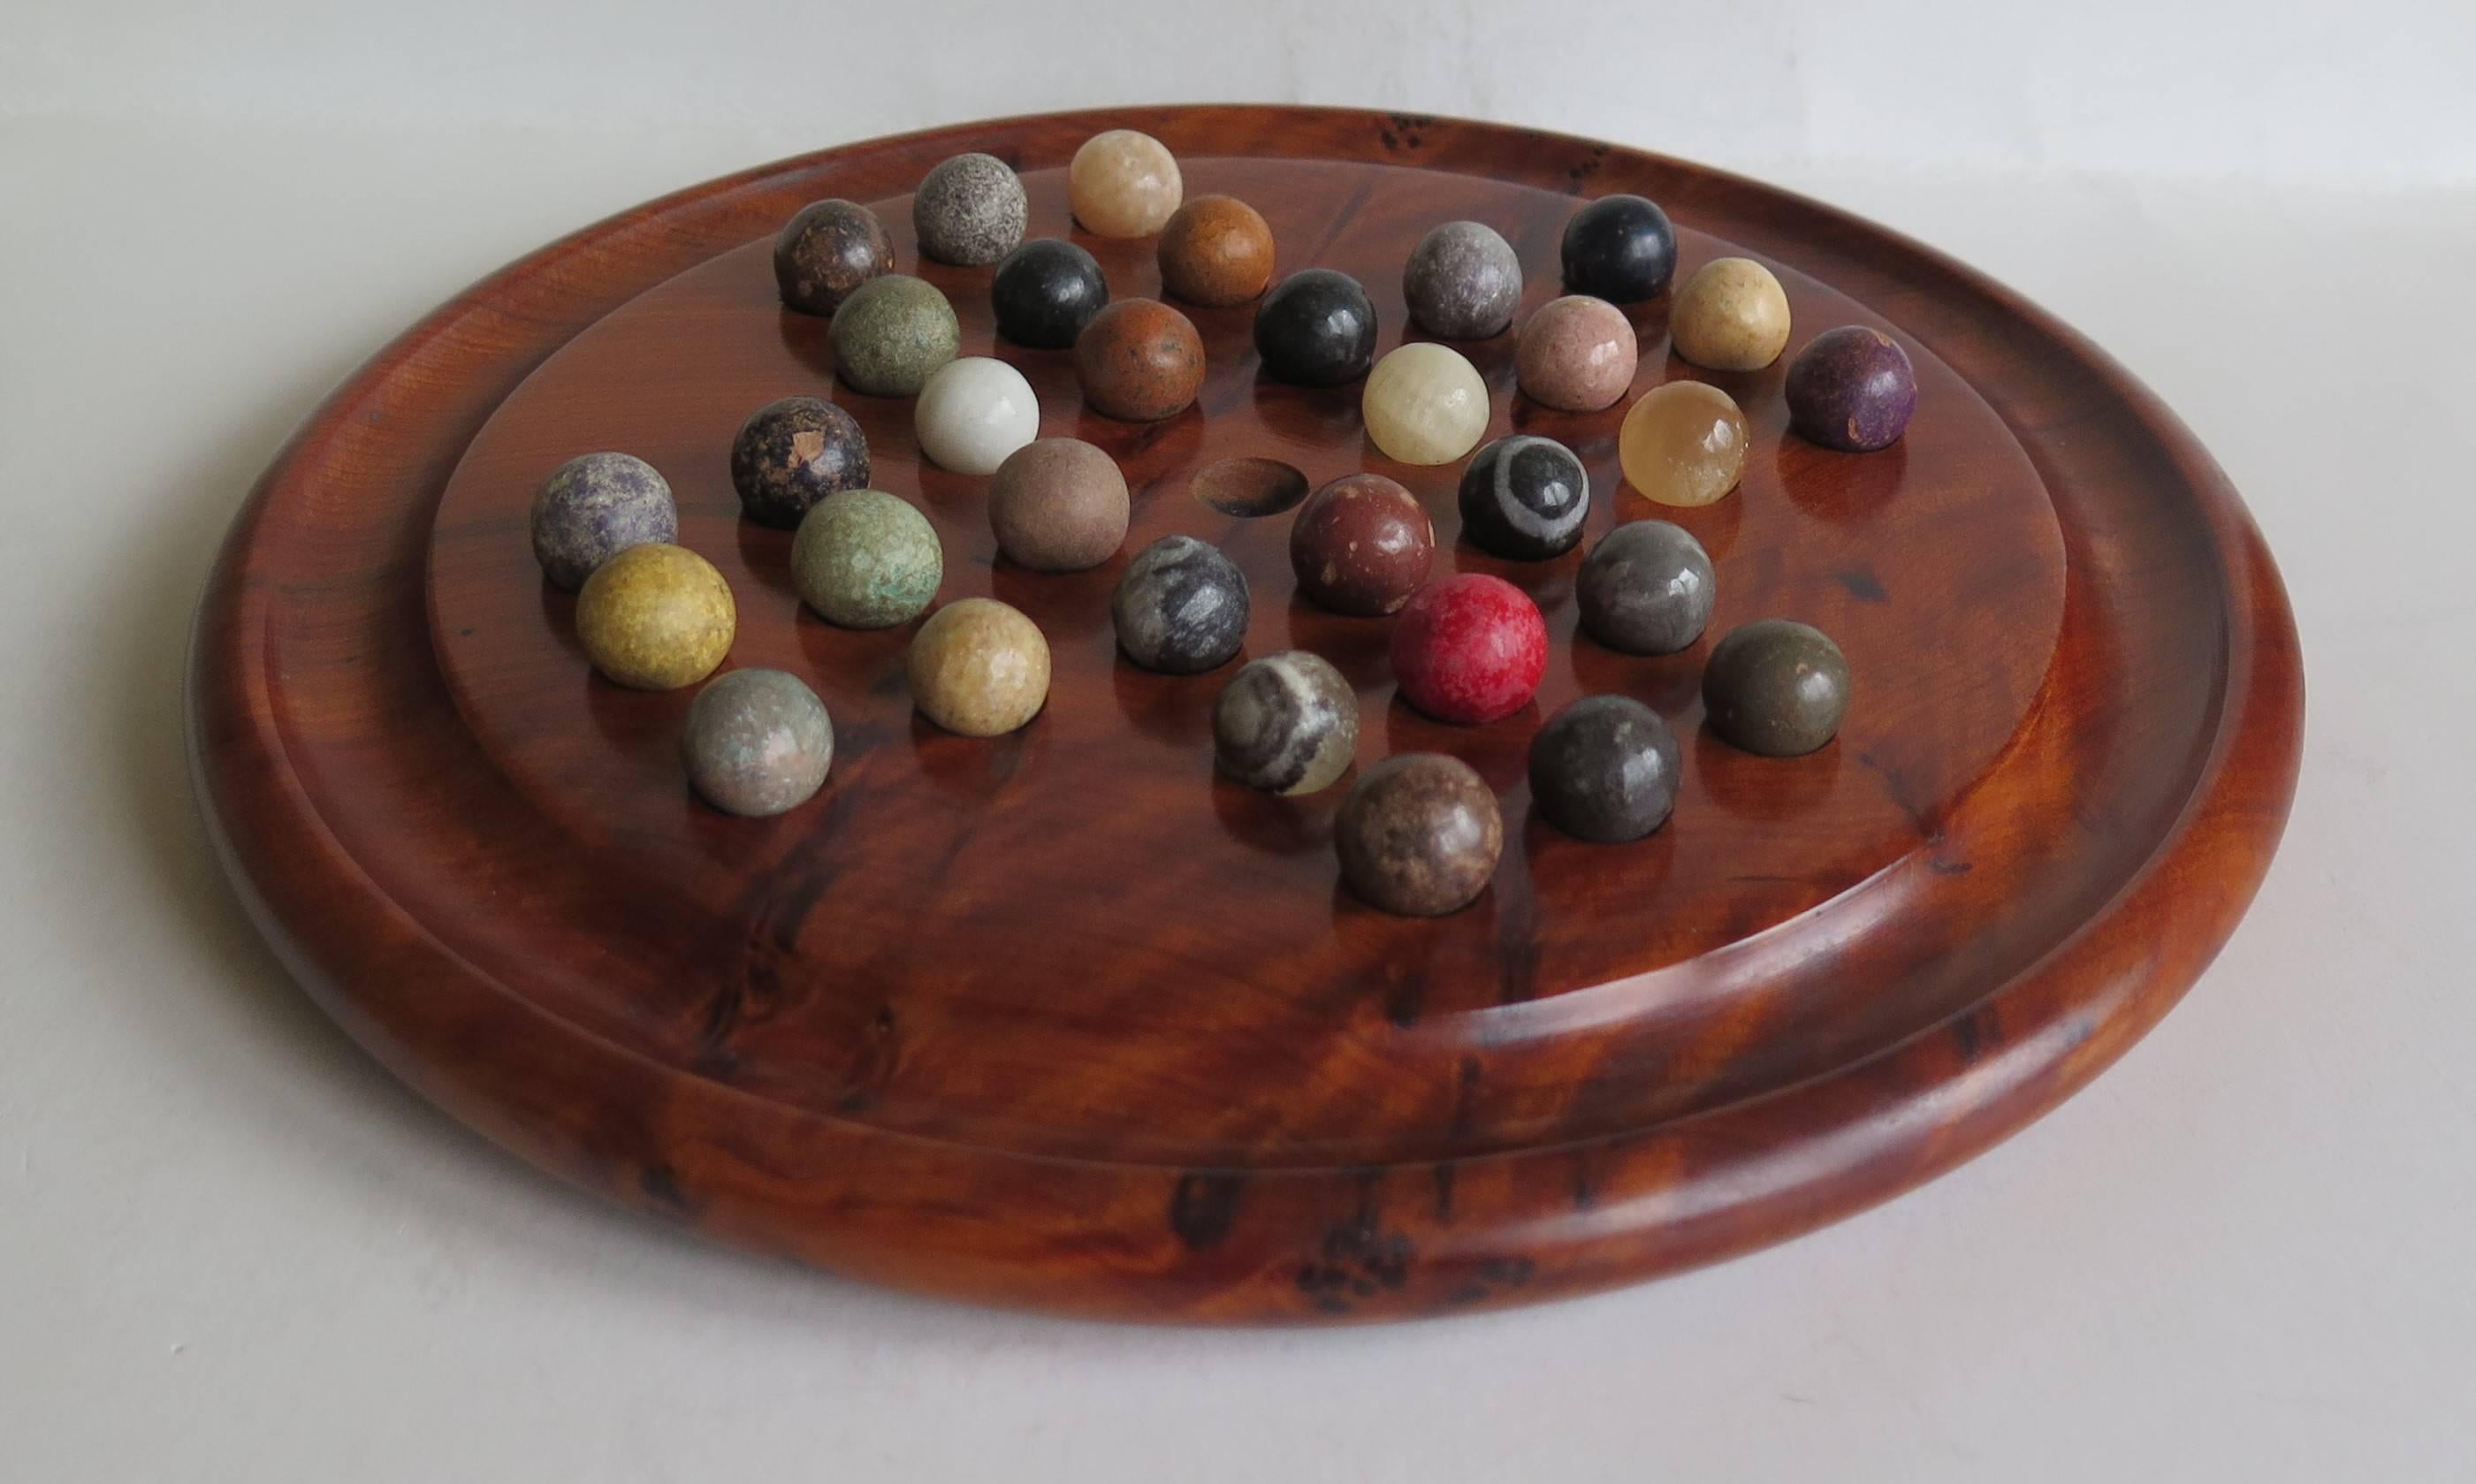 This is a complete Game of Marble Solitaire from the late 19th Century. 

The circular turned board is very attractive being made of Burr Walnut, with a gallery to the outer perimeter. The board has 32 equi-spaced holes with an additional central